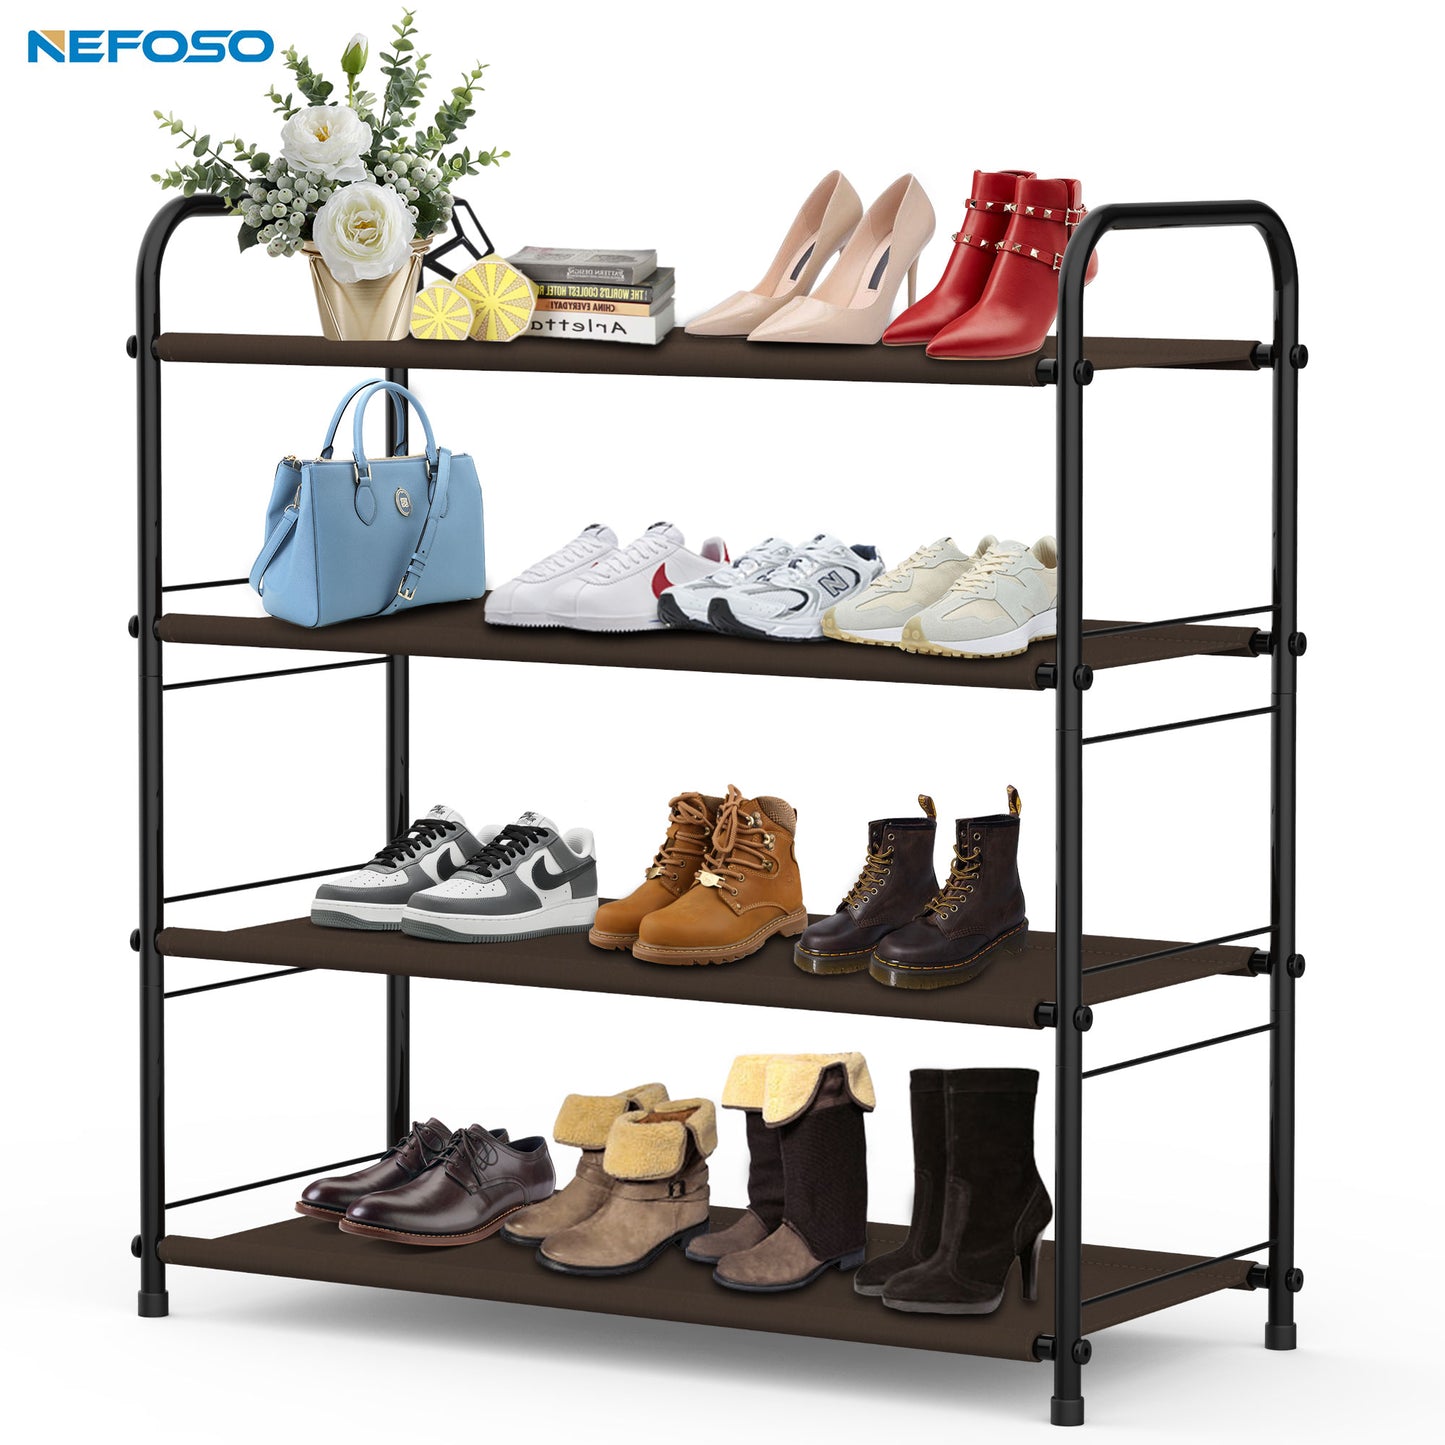 4 Row & 8 Tier Shoes Rack, Organizer For Shoes And Boots, Metal